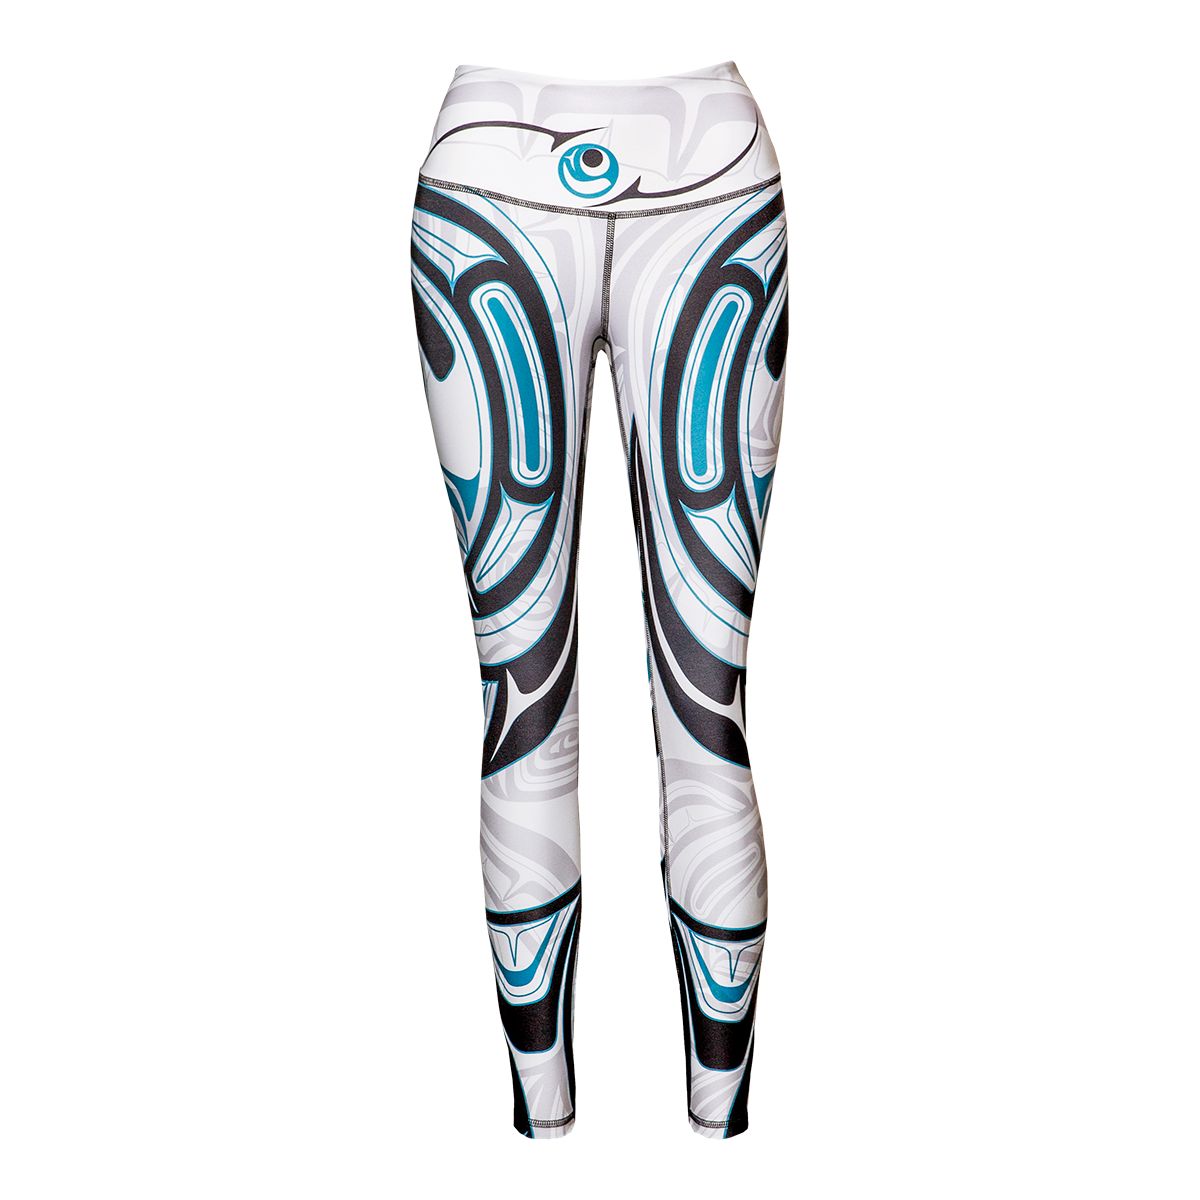 https://media-www.sportchek.ca/product/div-03-softgoods/dpt-70-athletic-clothing/sdpt-02-womens/334241237/ea-nominou-wolf-and-moon-white-legging-white-31d835b2-03fa-4527-8728-65a32420bcad-jpgrendition.jpg